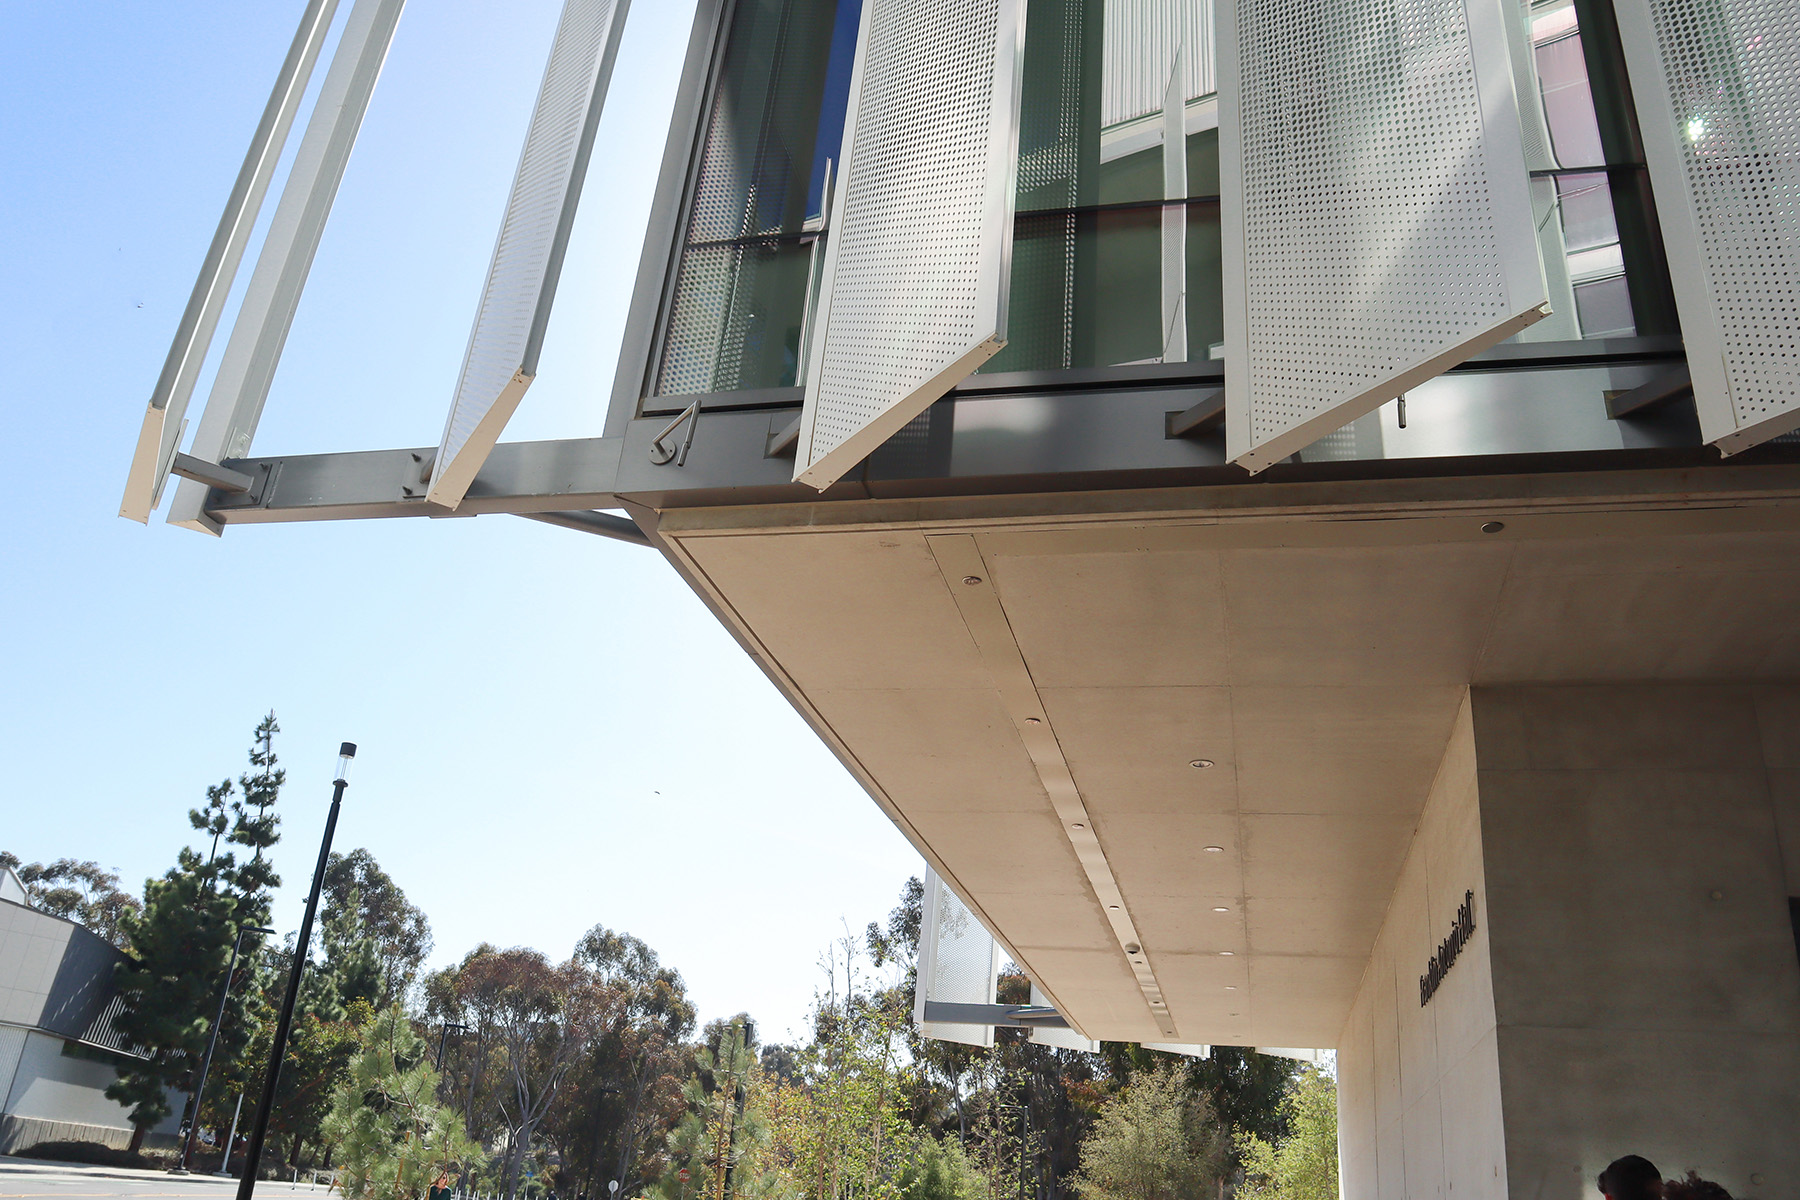 An up-close image of the aluminum sections, called fins, which look like they float off the side of the building. 